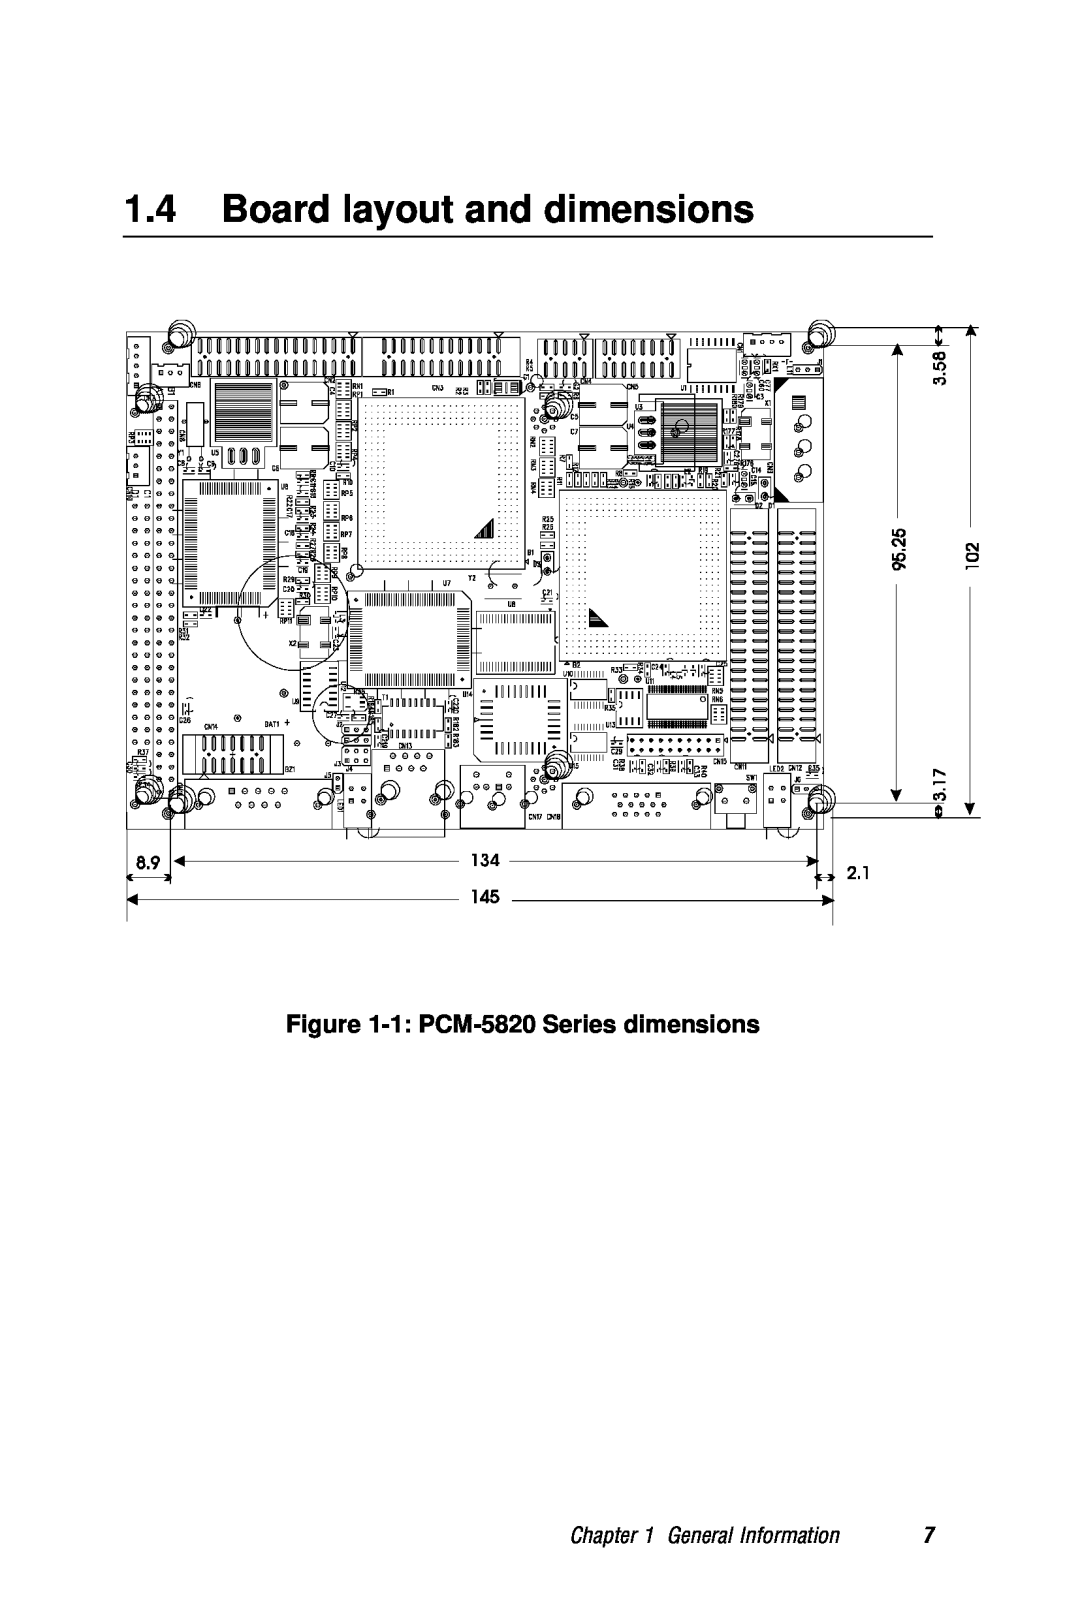 AMD manual Board layout and dimensions, 1 PCM-5820 Series dimensions, General Information 